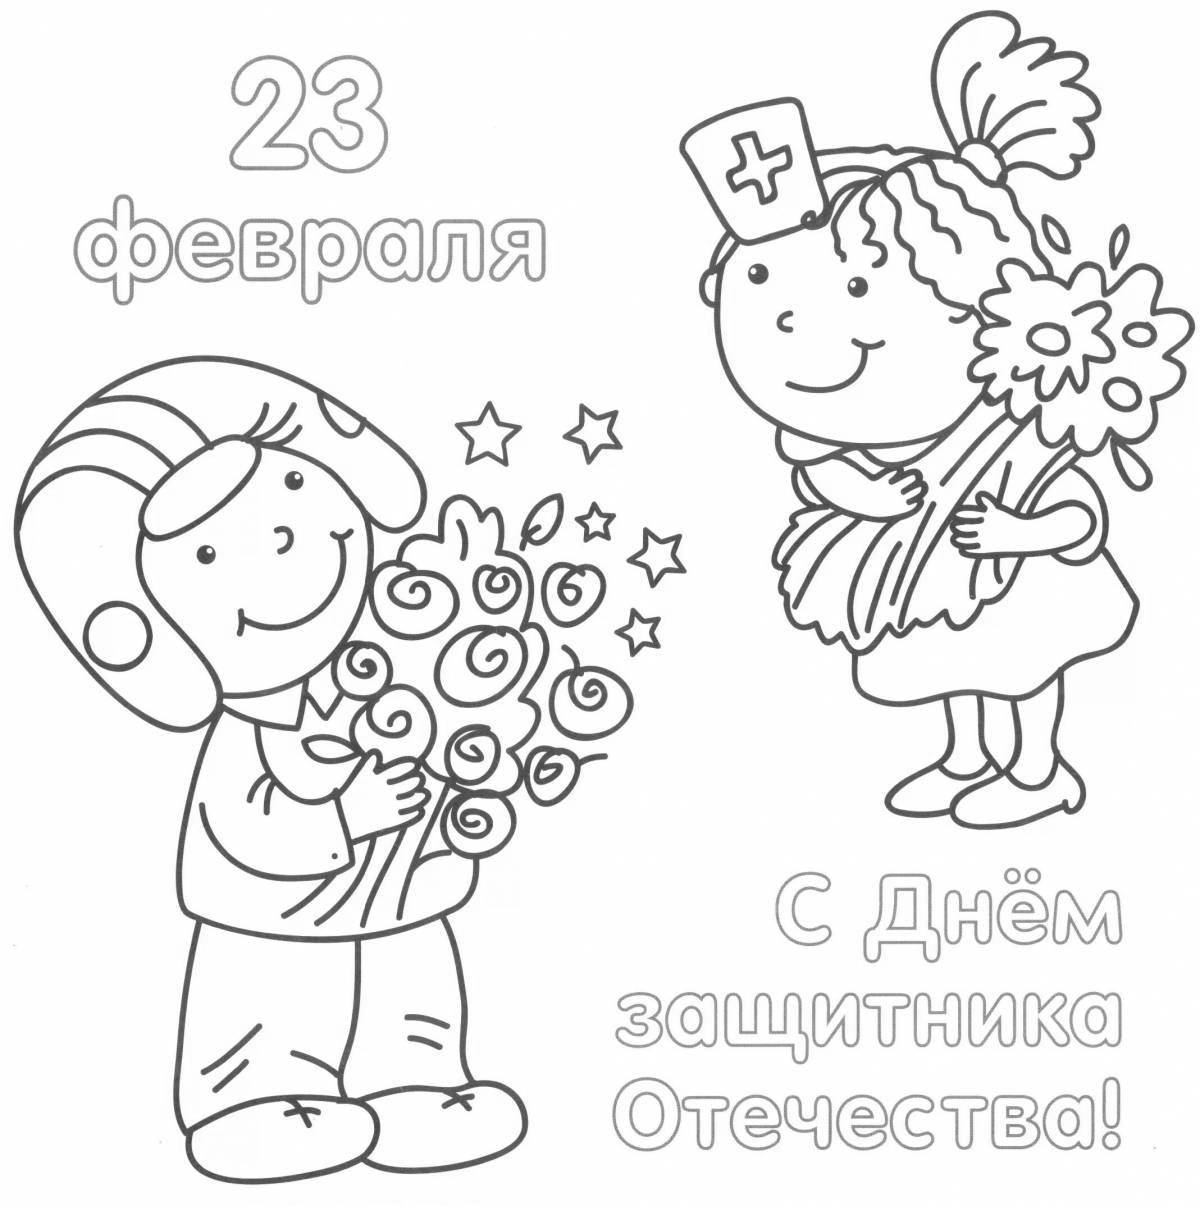 Attractive letters 23 february coloring book